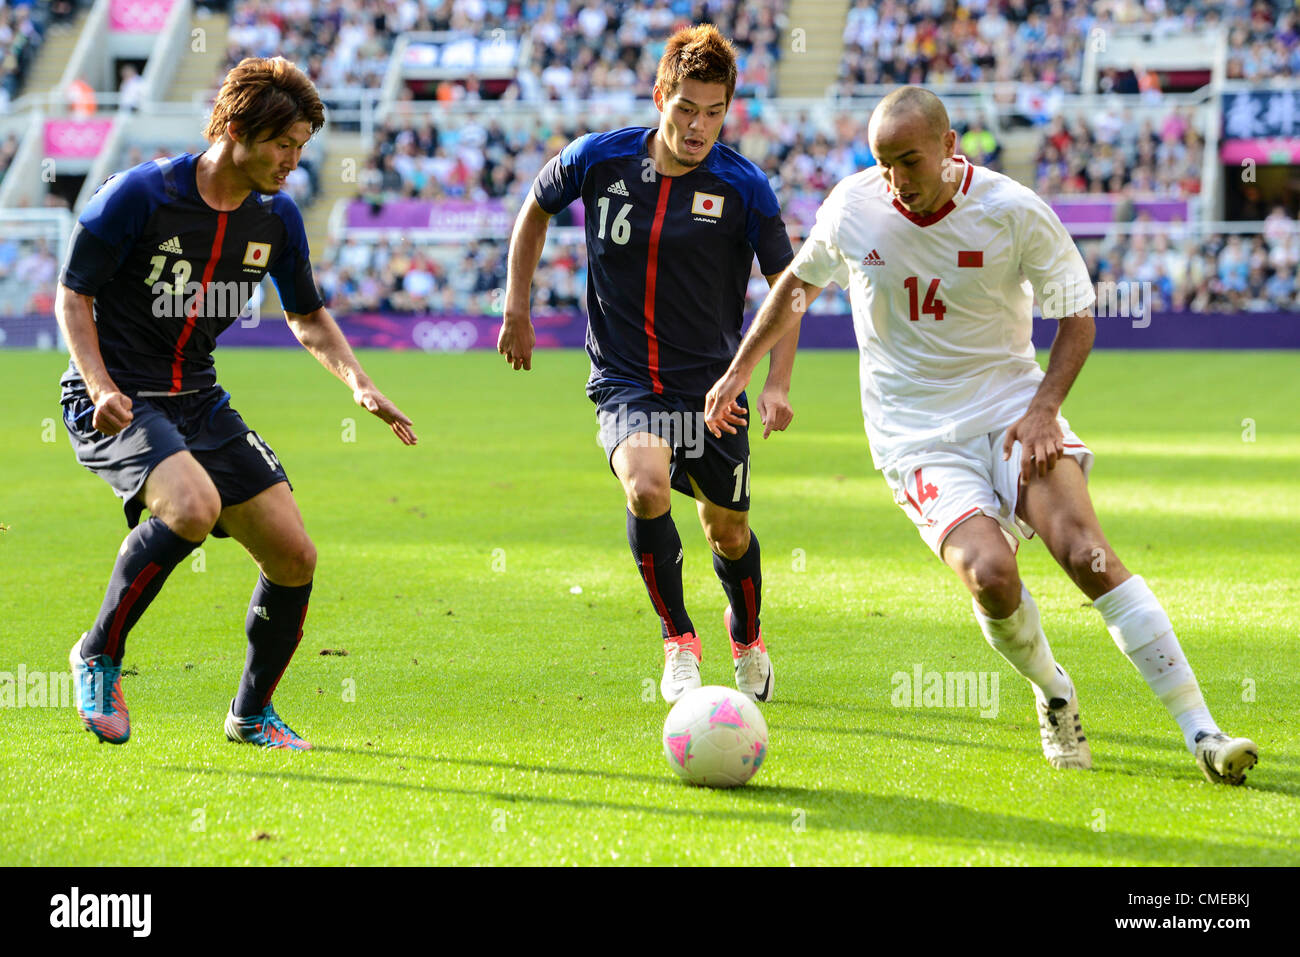 29.07.2012 Newcastle, England. Morocco's Houssine Kharja takes on Daisuke Suzuki and Hotaru Yamaguchi in action during the Olympic Football Men's Preliminary game between Japan and Morocco from St James Park. Stock Photo